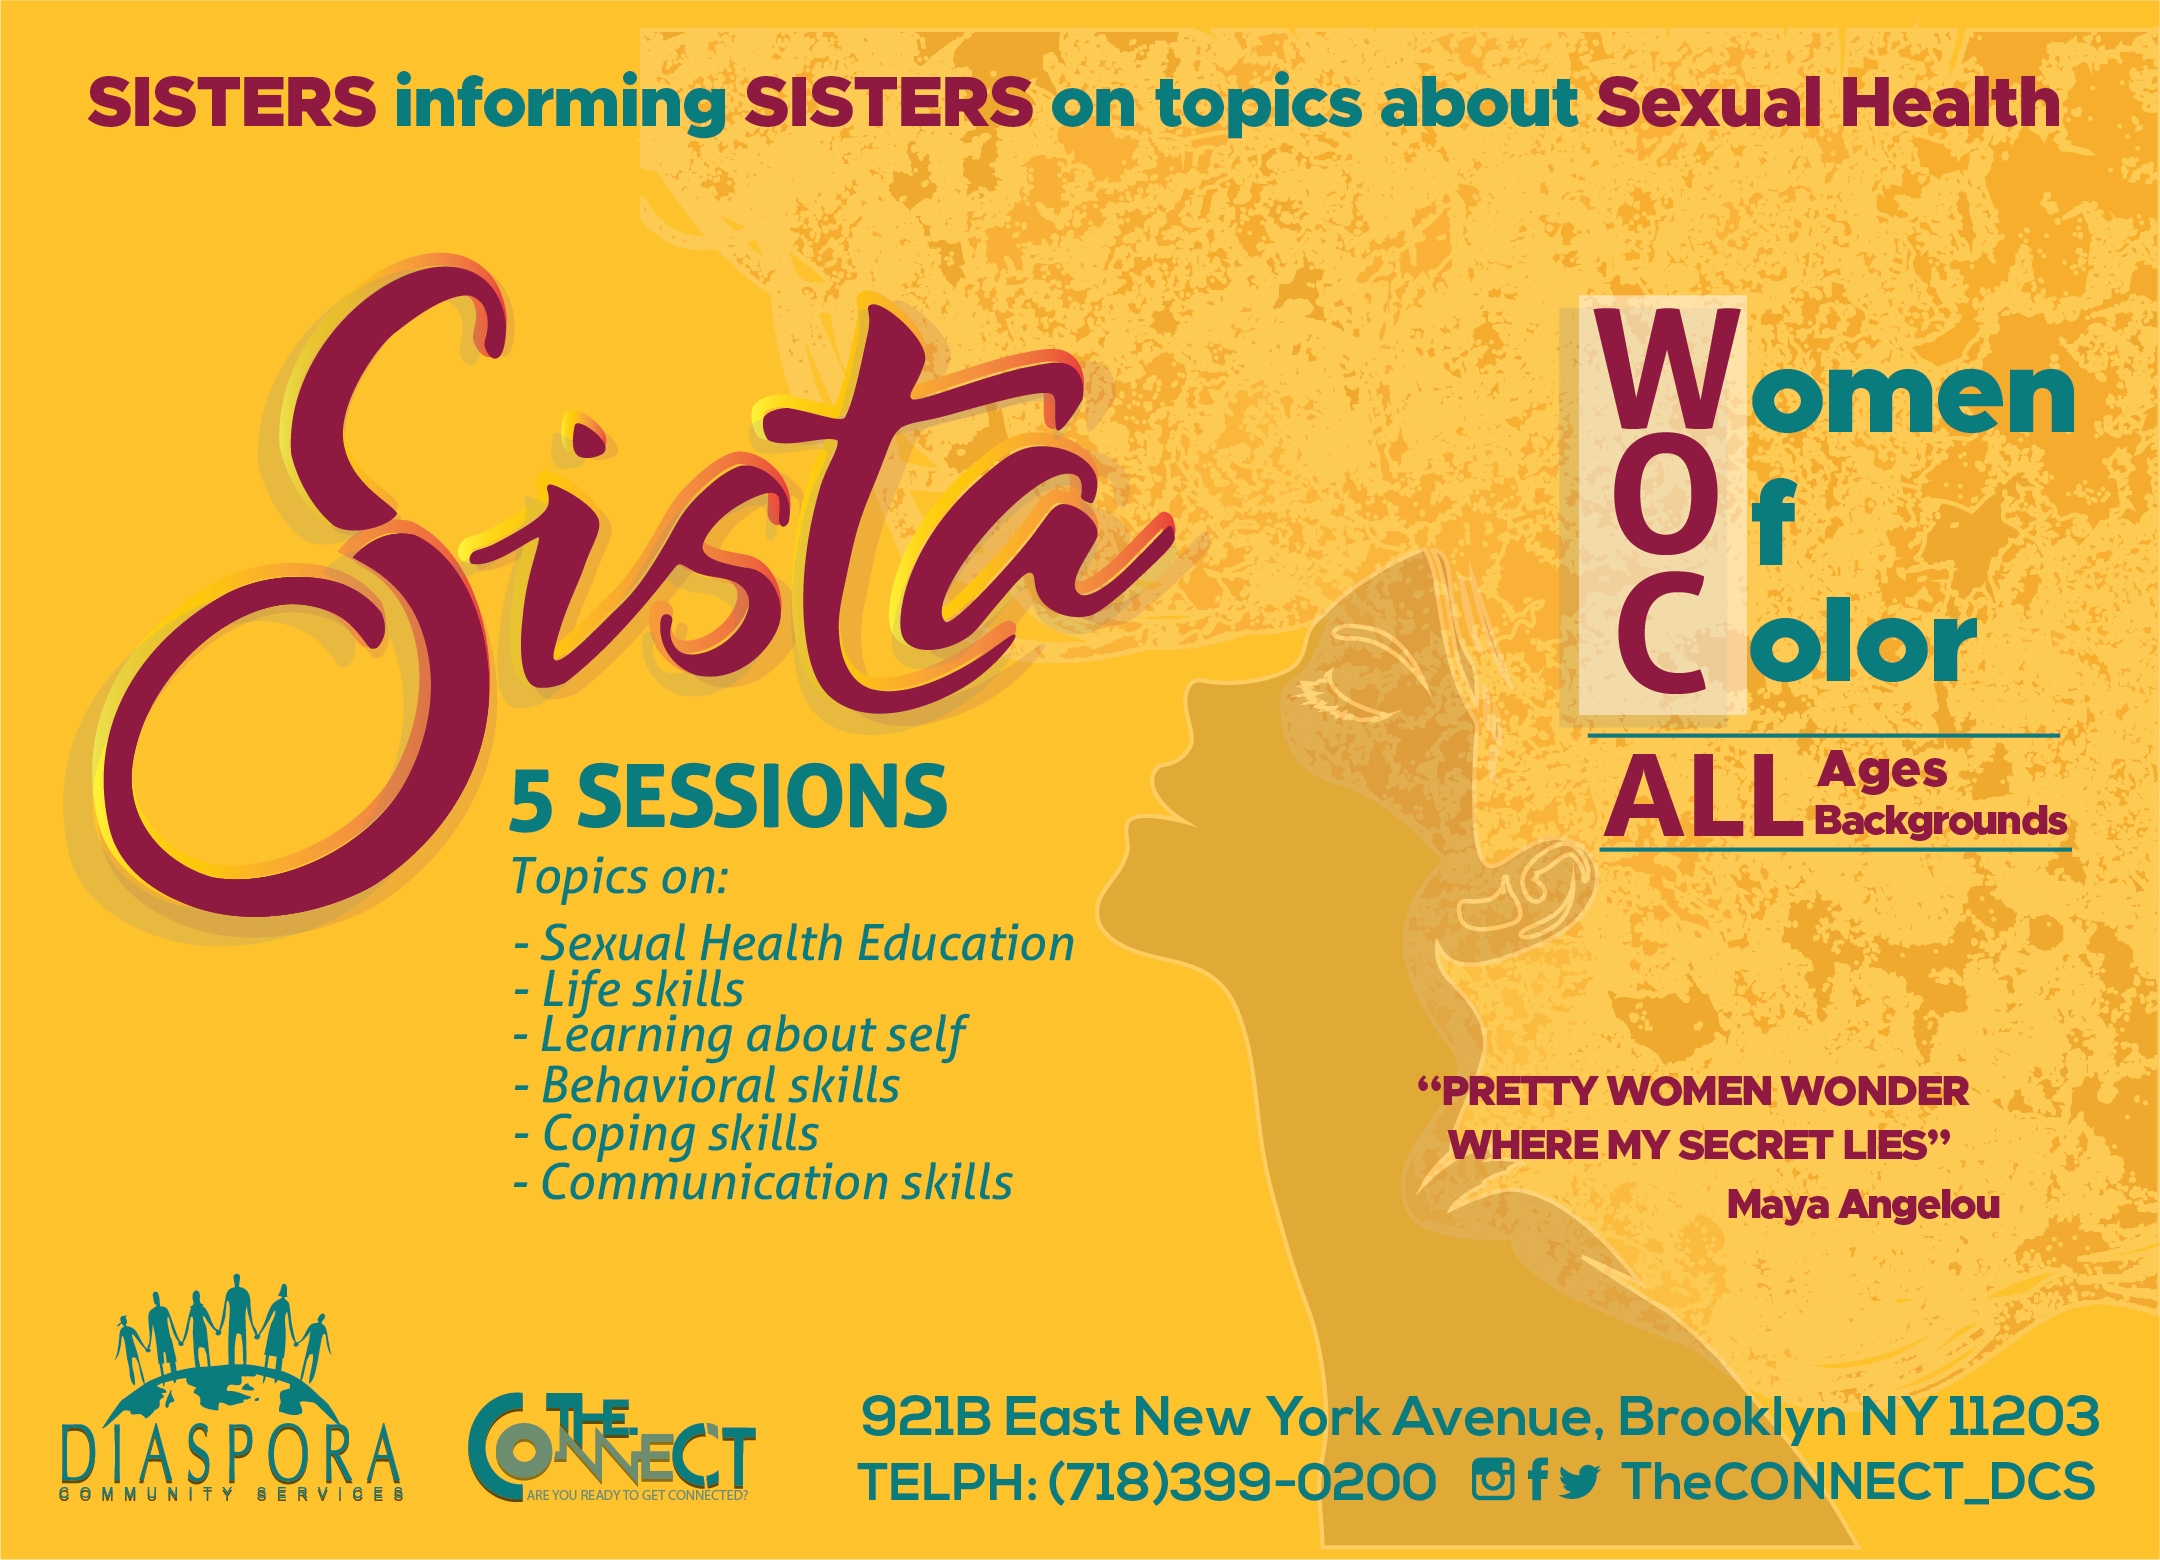  SISTA (SISTERS informing SISTERS on topics about Sexual Health)